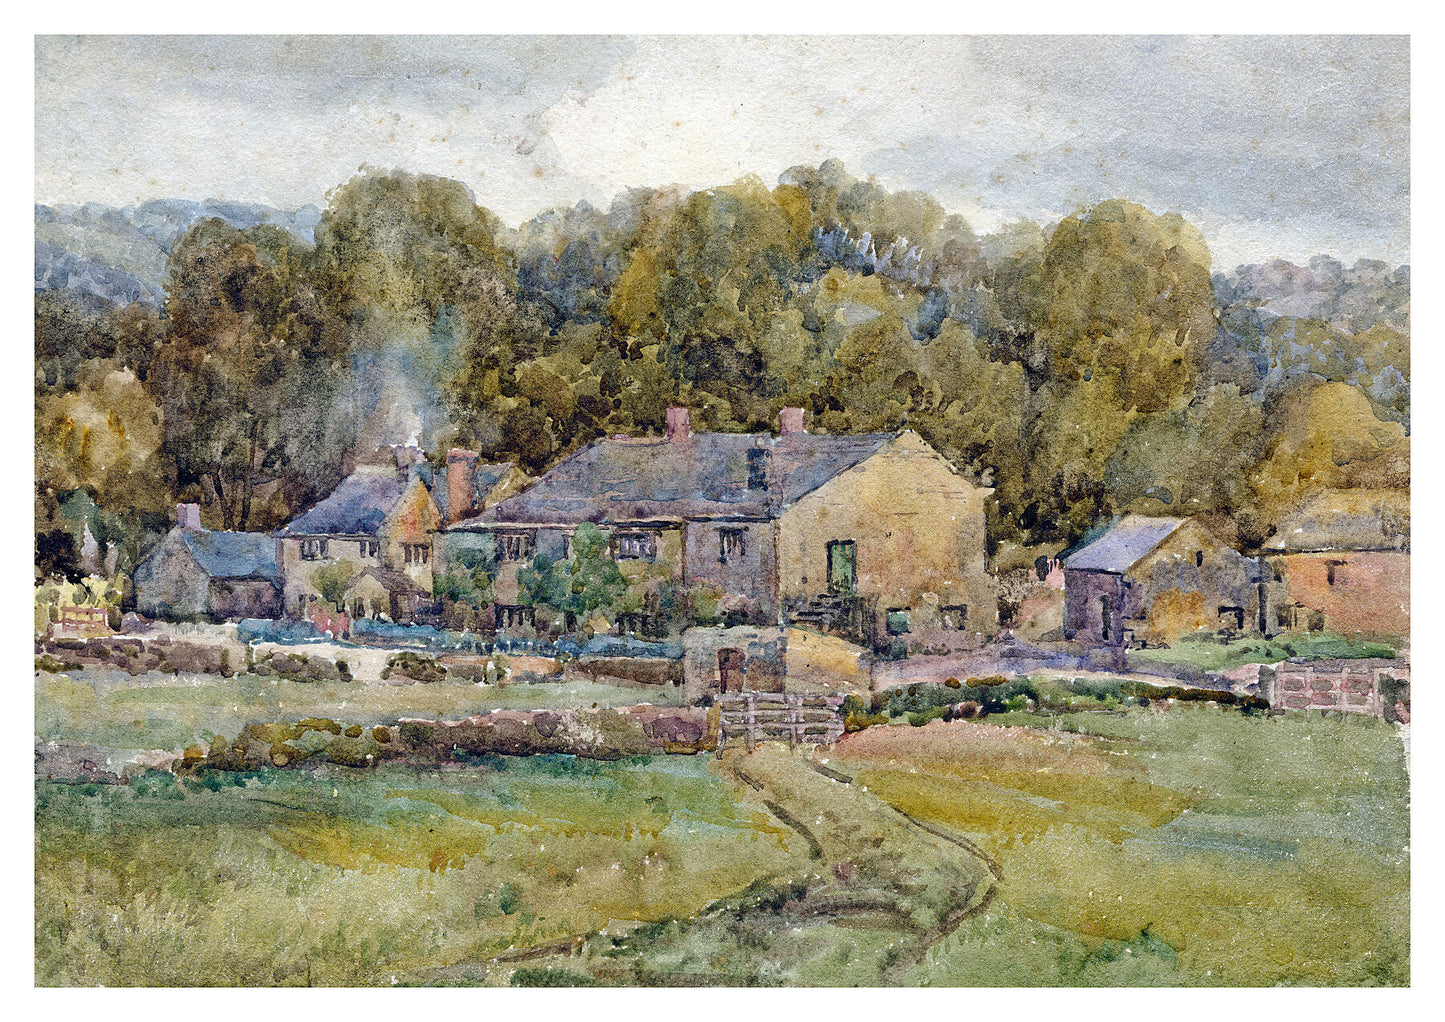 Reproduction watercolour painting of Beckfoot Farm by Walter C Foster